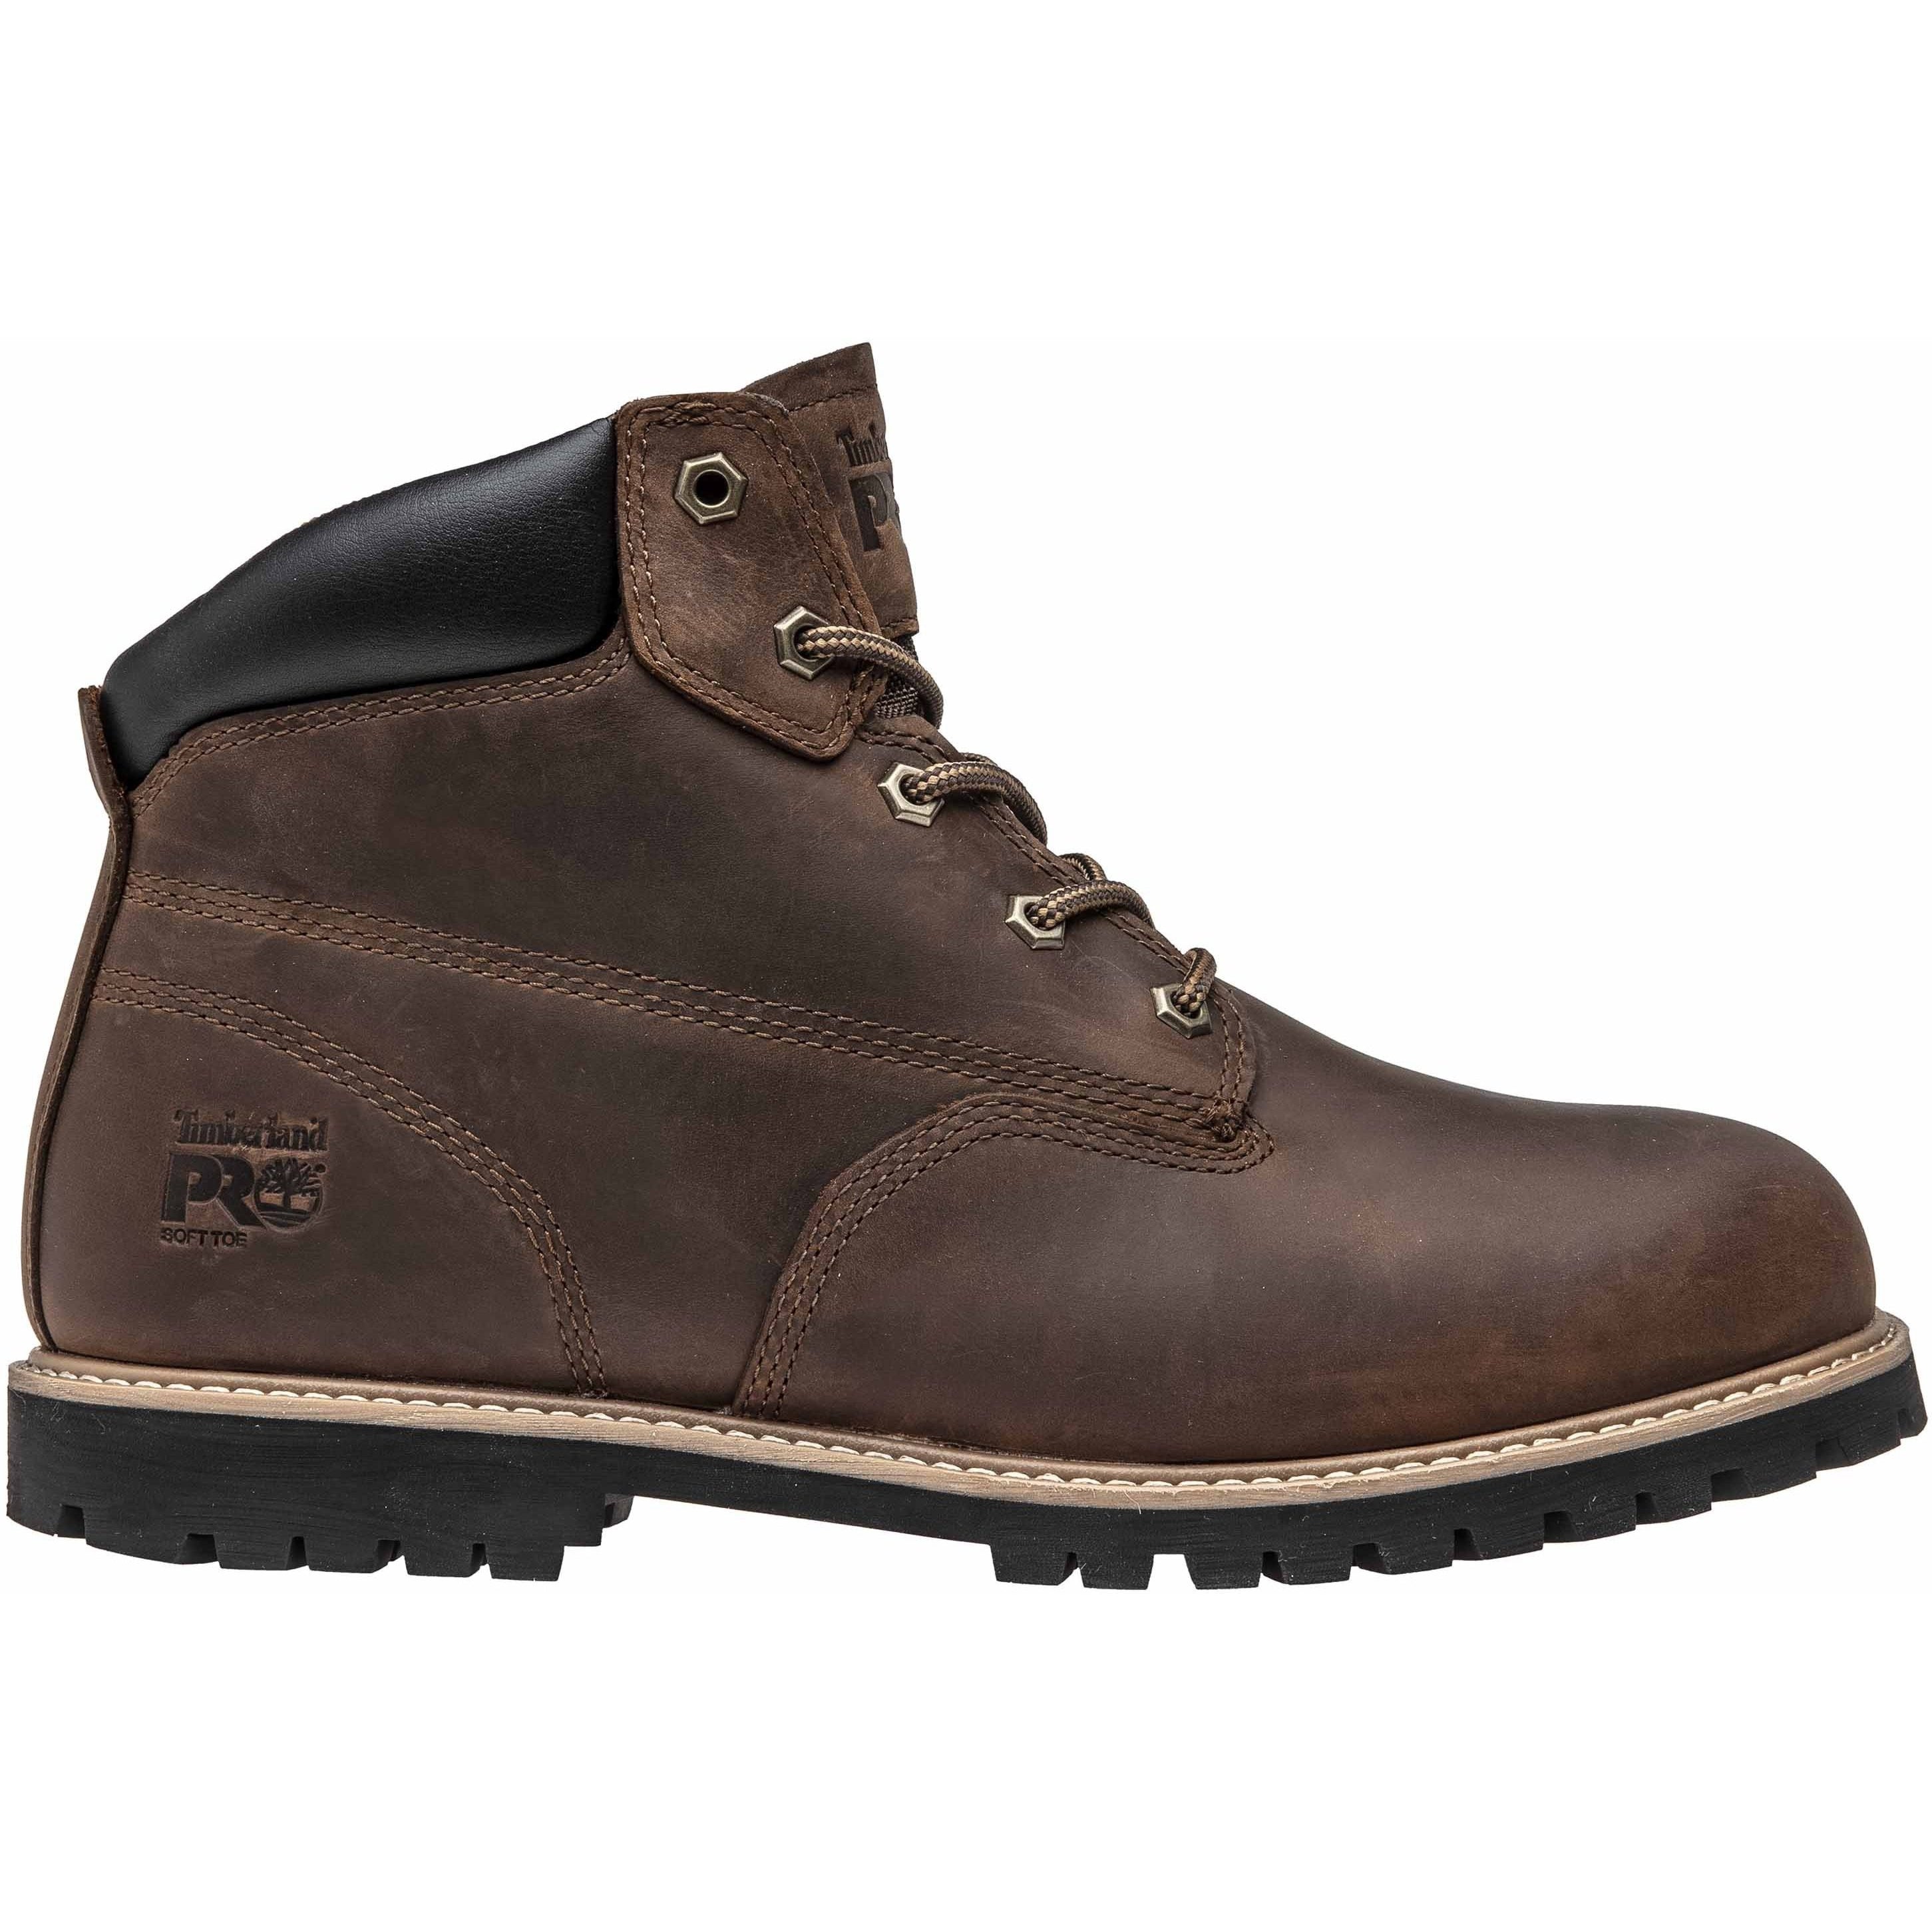 Timberland PRO Men's Gritsone 6" Work Boot - Brown - TB0A1WG2214  - Overlook Boots